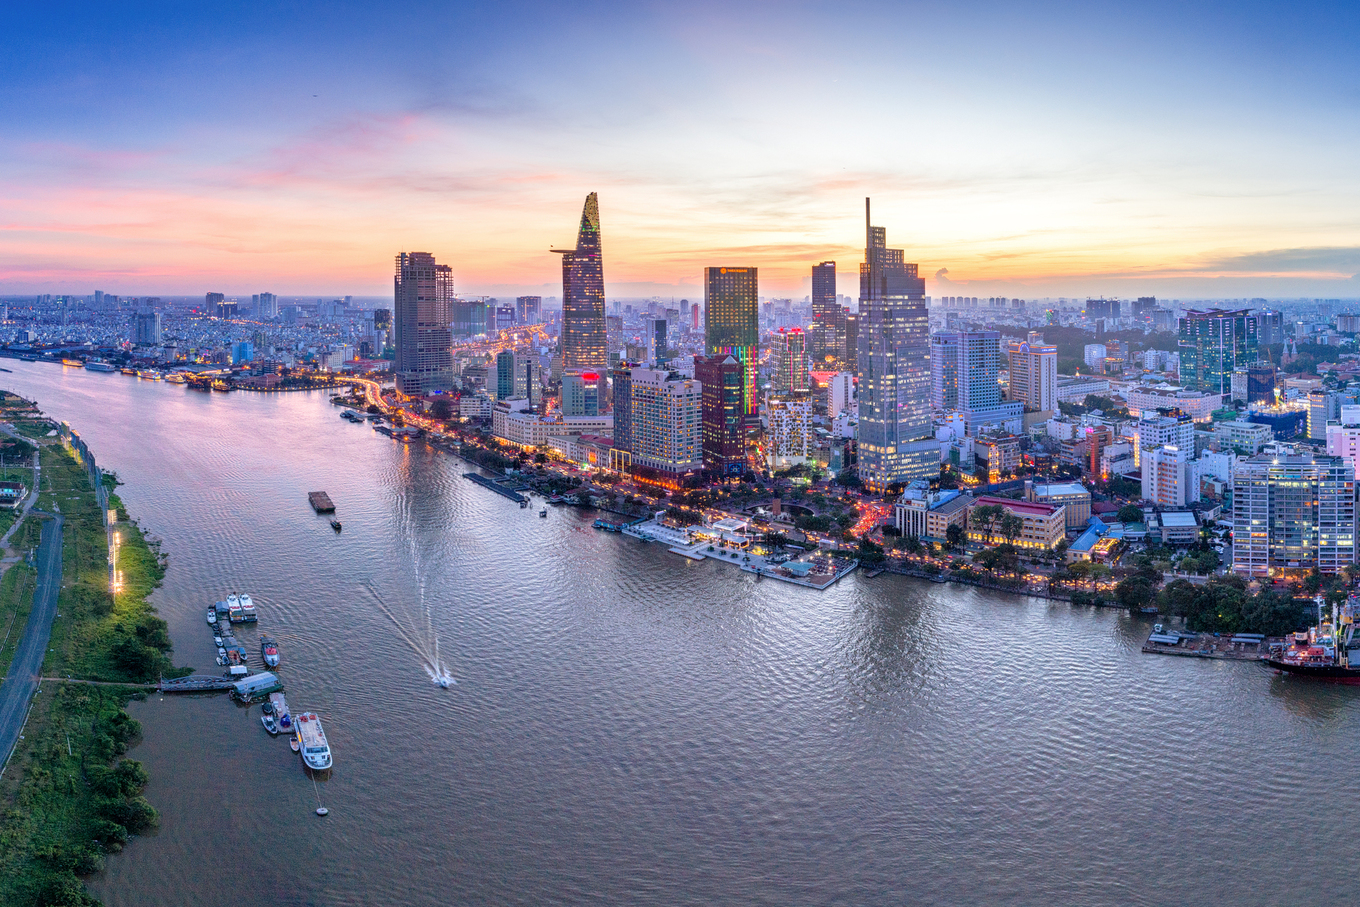 4 Vietnamese cities are in the top most visited cities in 2019.